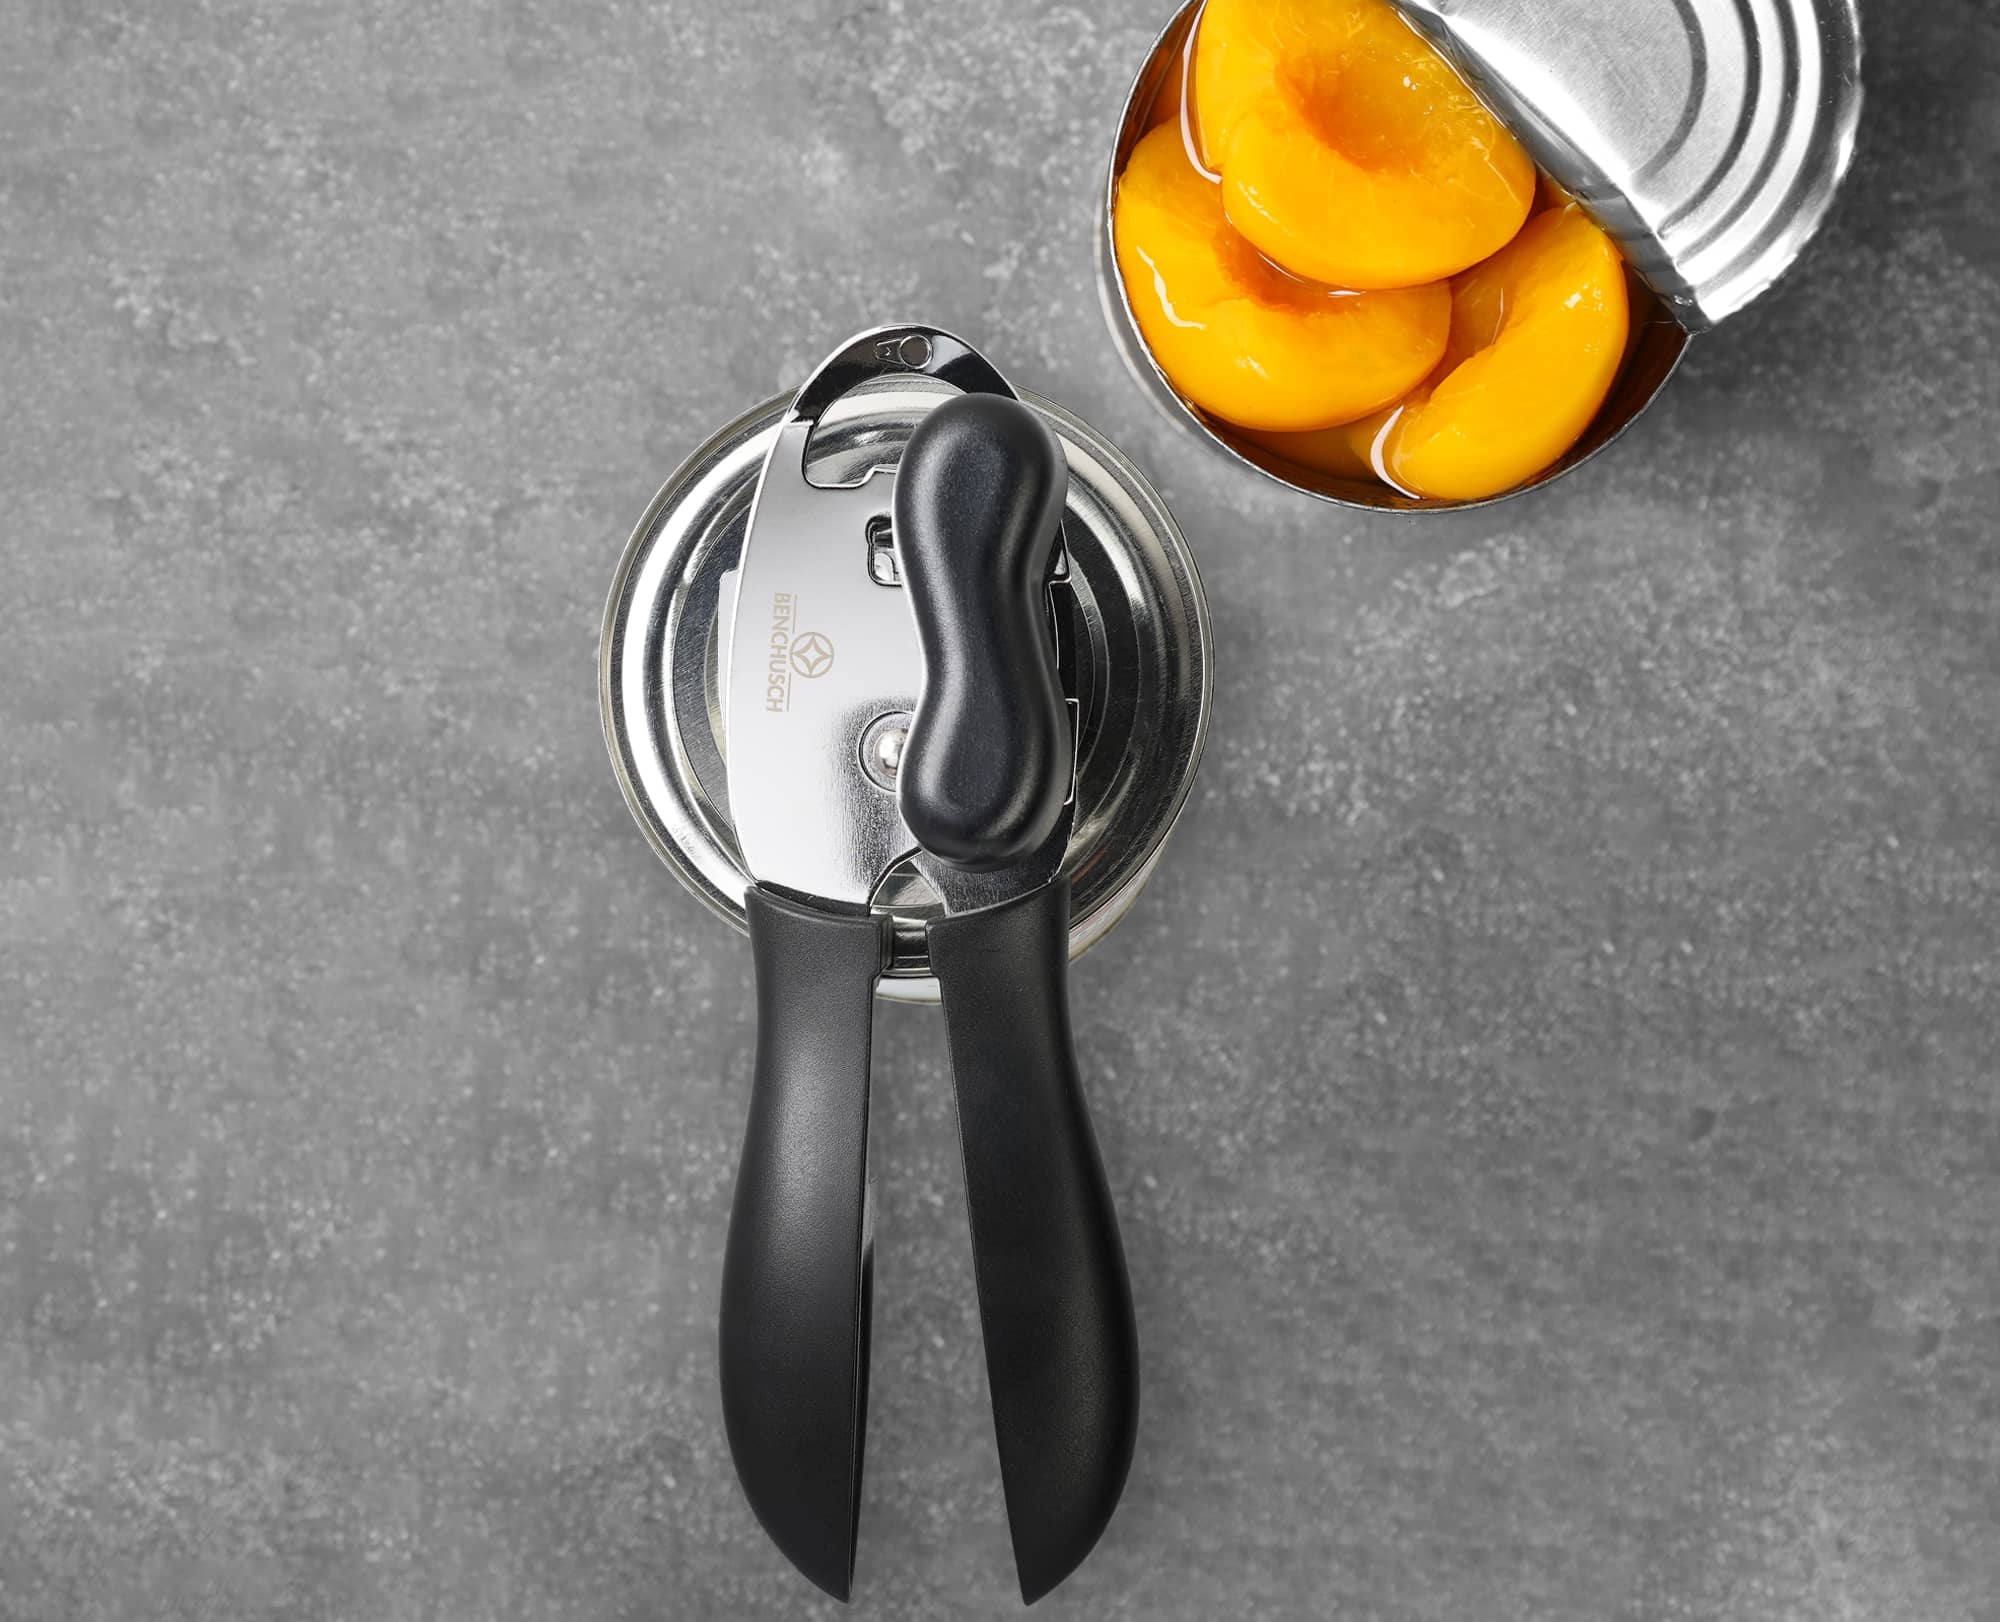 Benchusch Mordena Can Opener with Easy Turn Knob with canned peach opened on the dark background